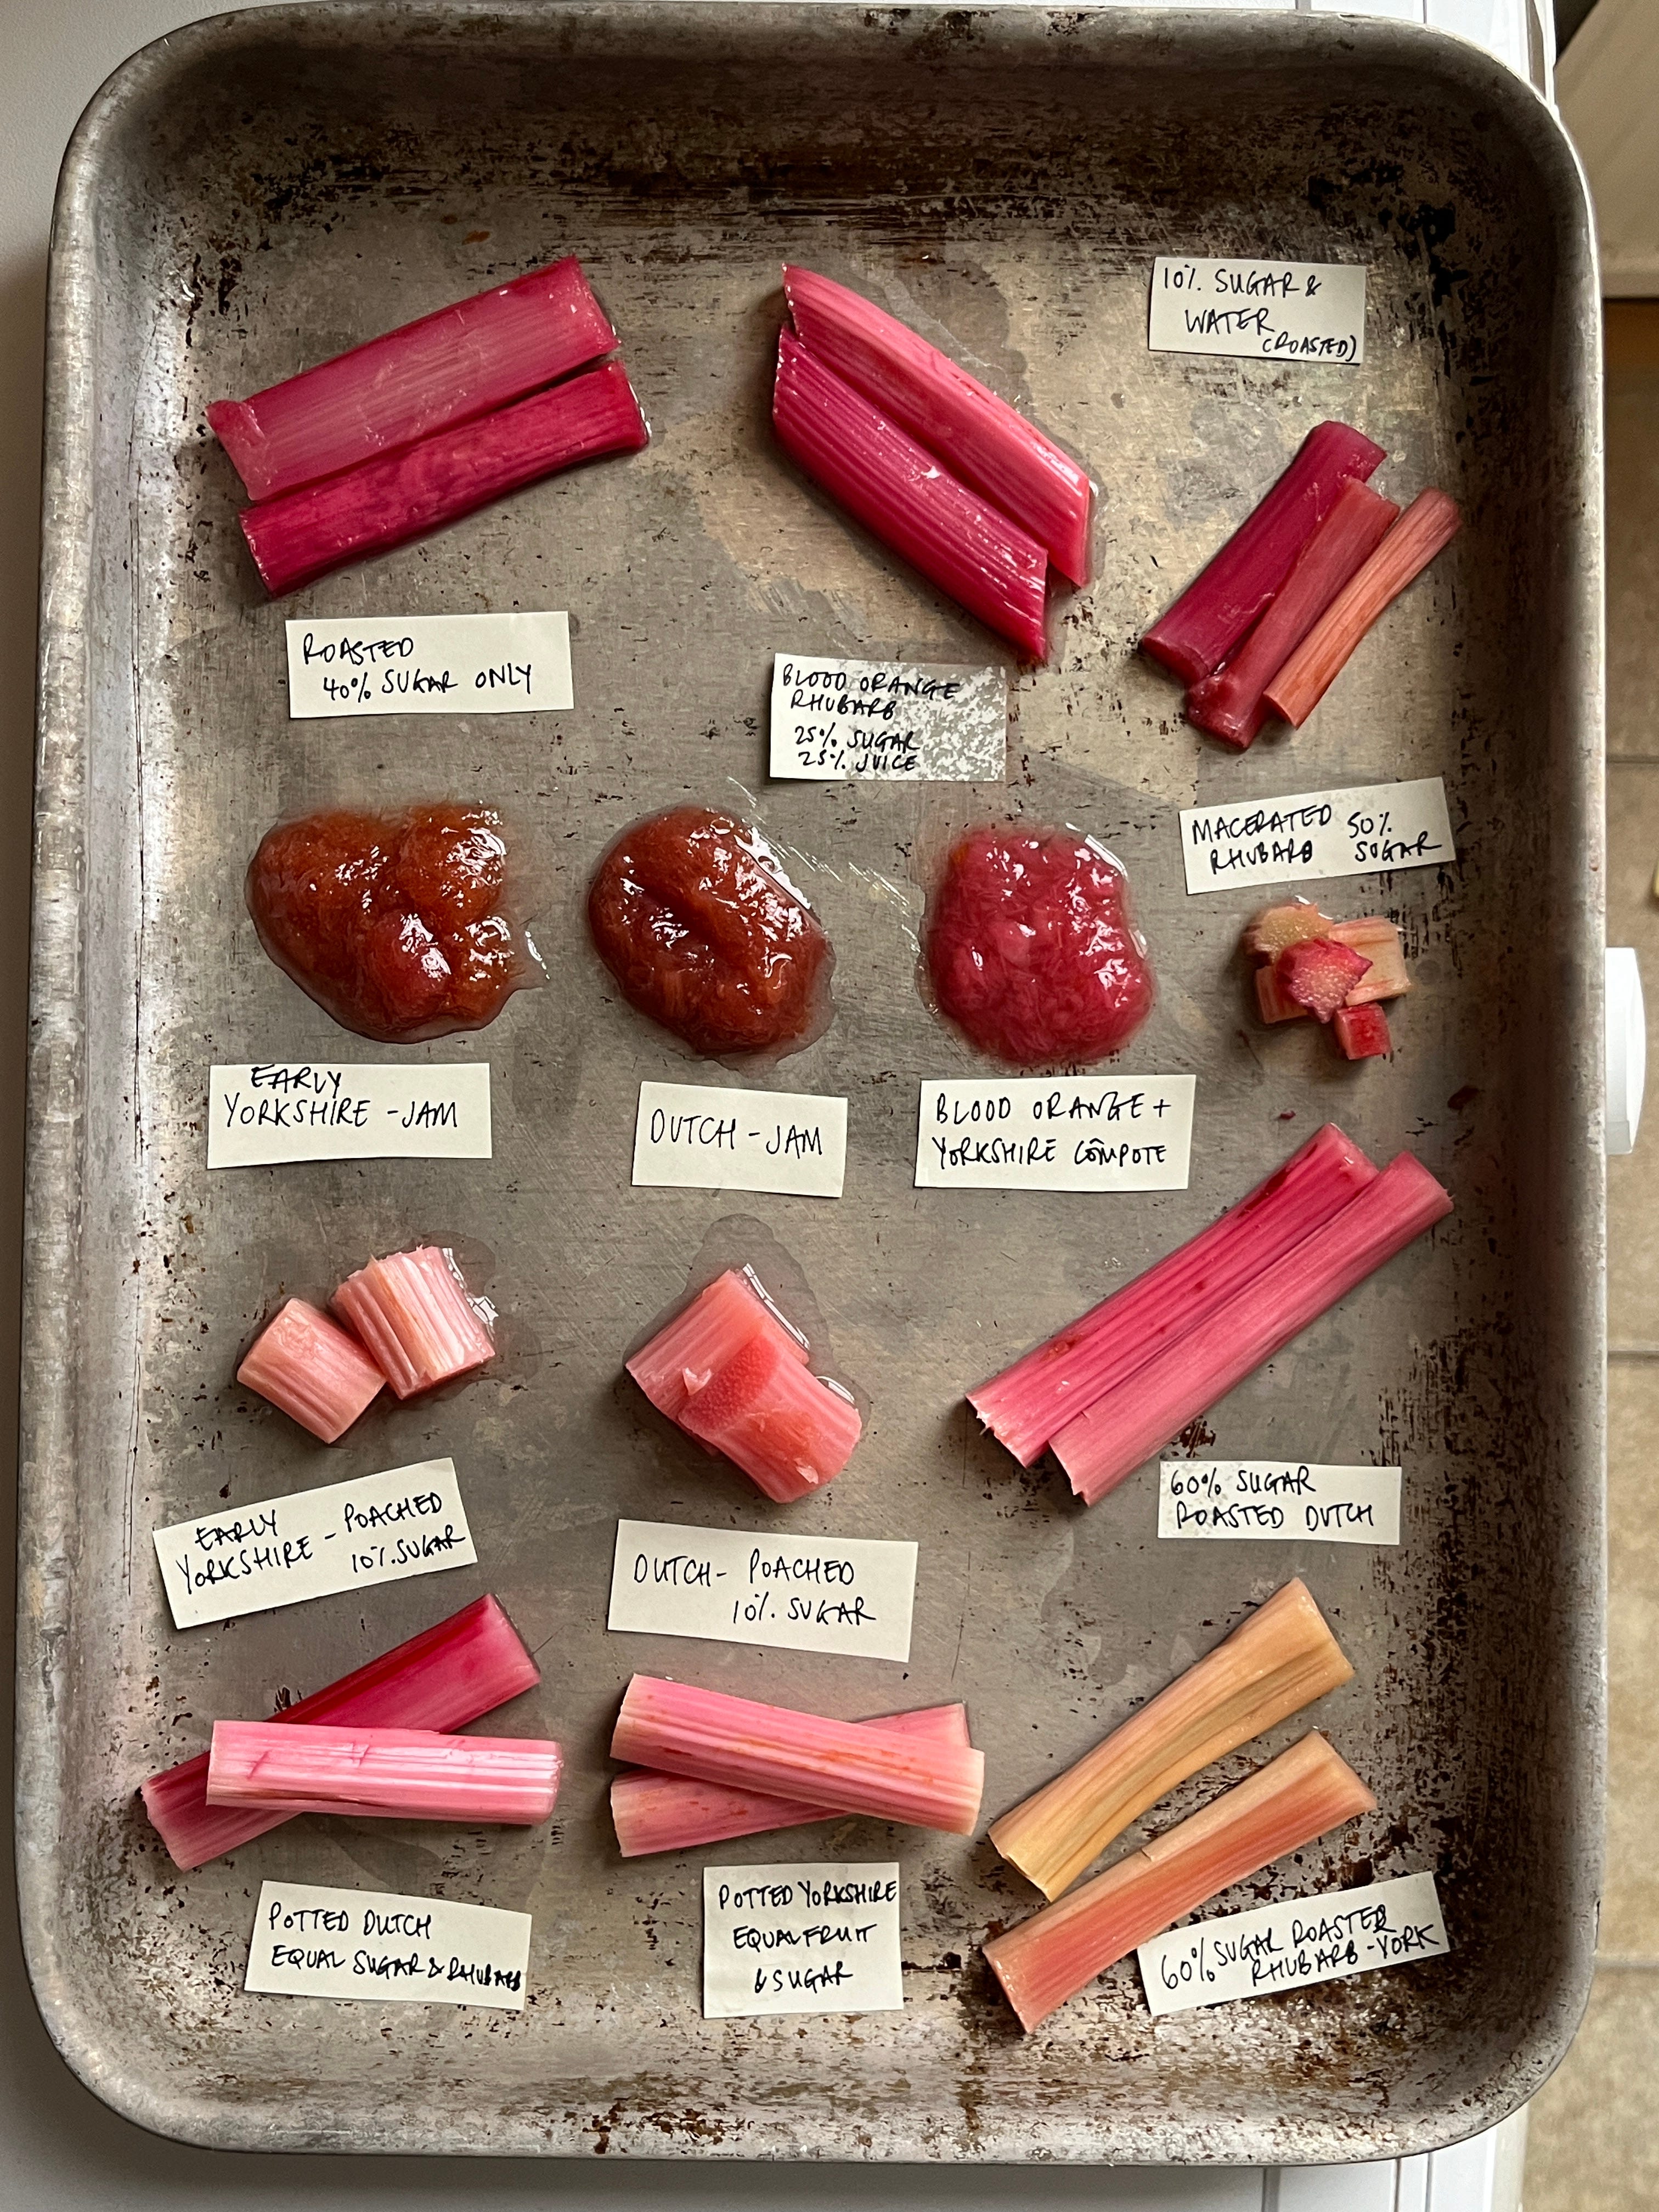 15 Tips You Need When Cooking With Rhubarb